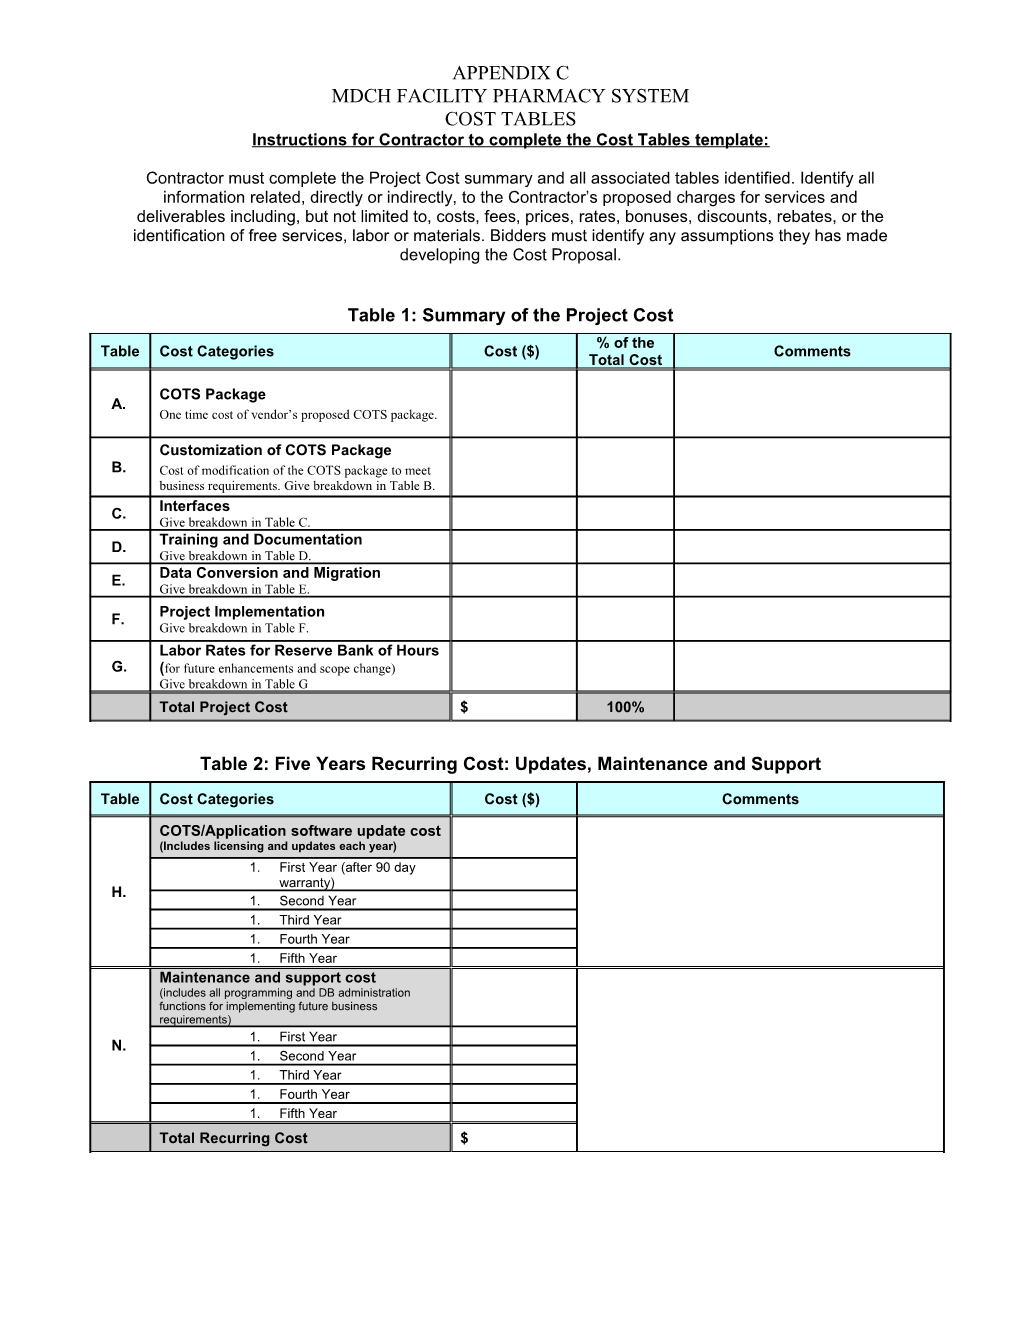 Instructions for Contractor to Complete the Cost Tables Template